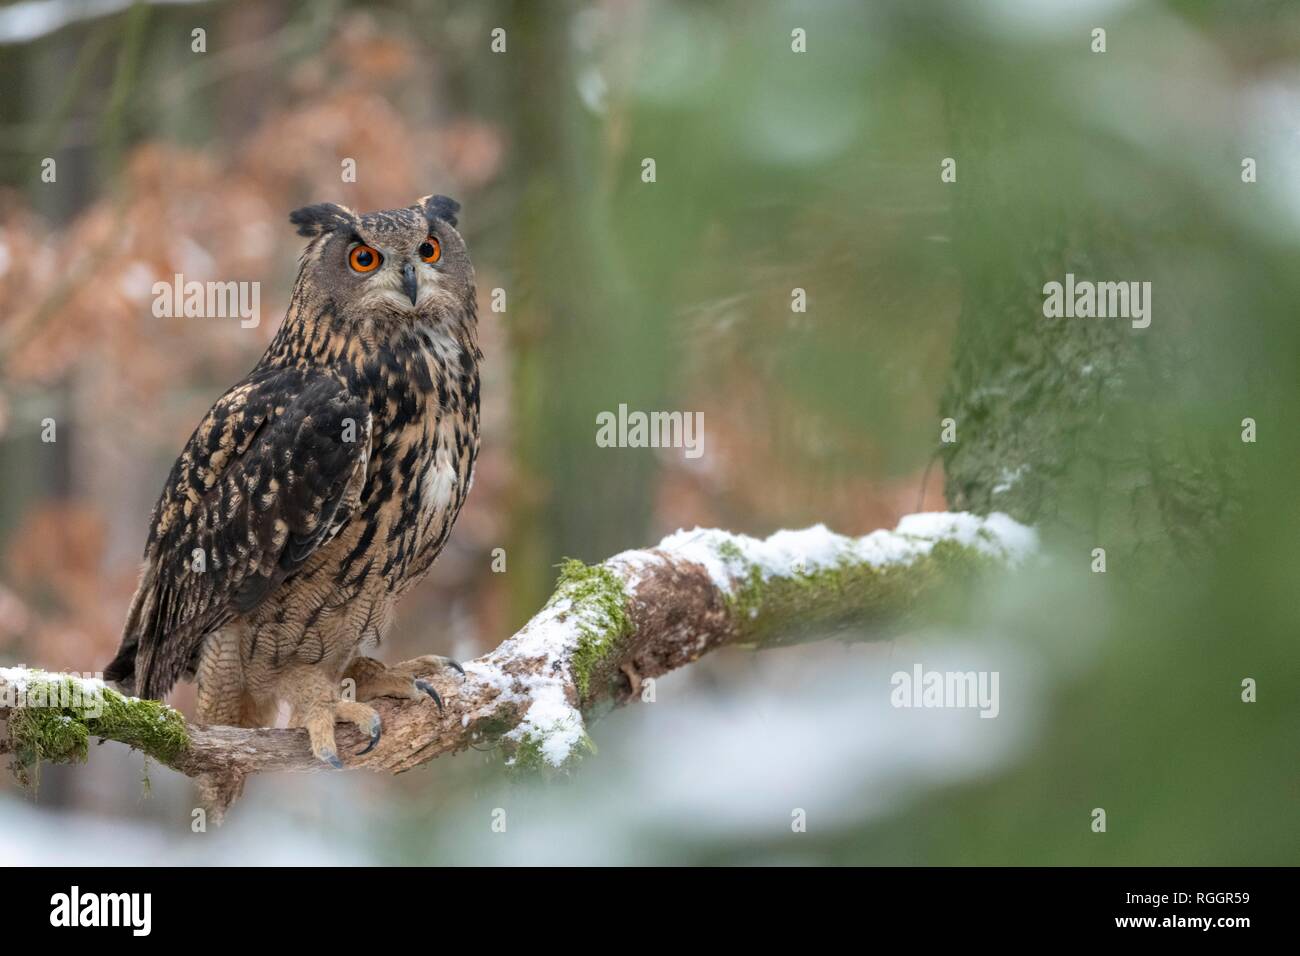 Eurasian eagle-owl (Bubo bubo), sitting on a branch with snow, captive, Czech Republic Stock Photo